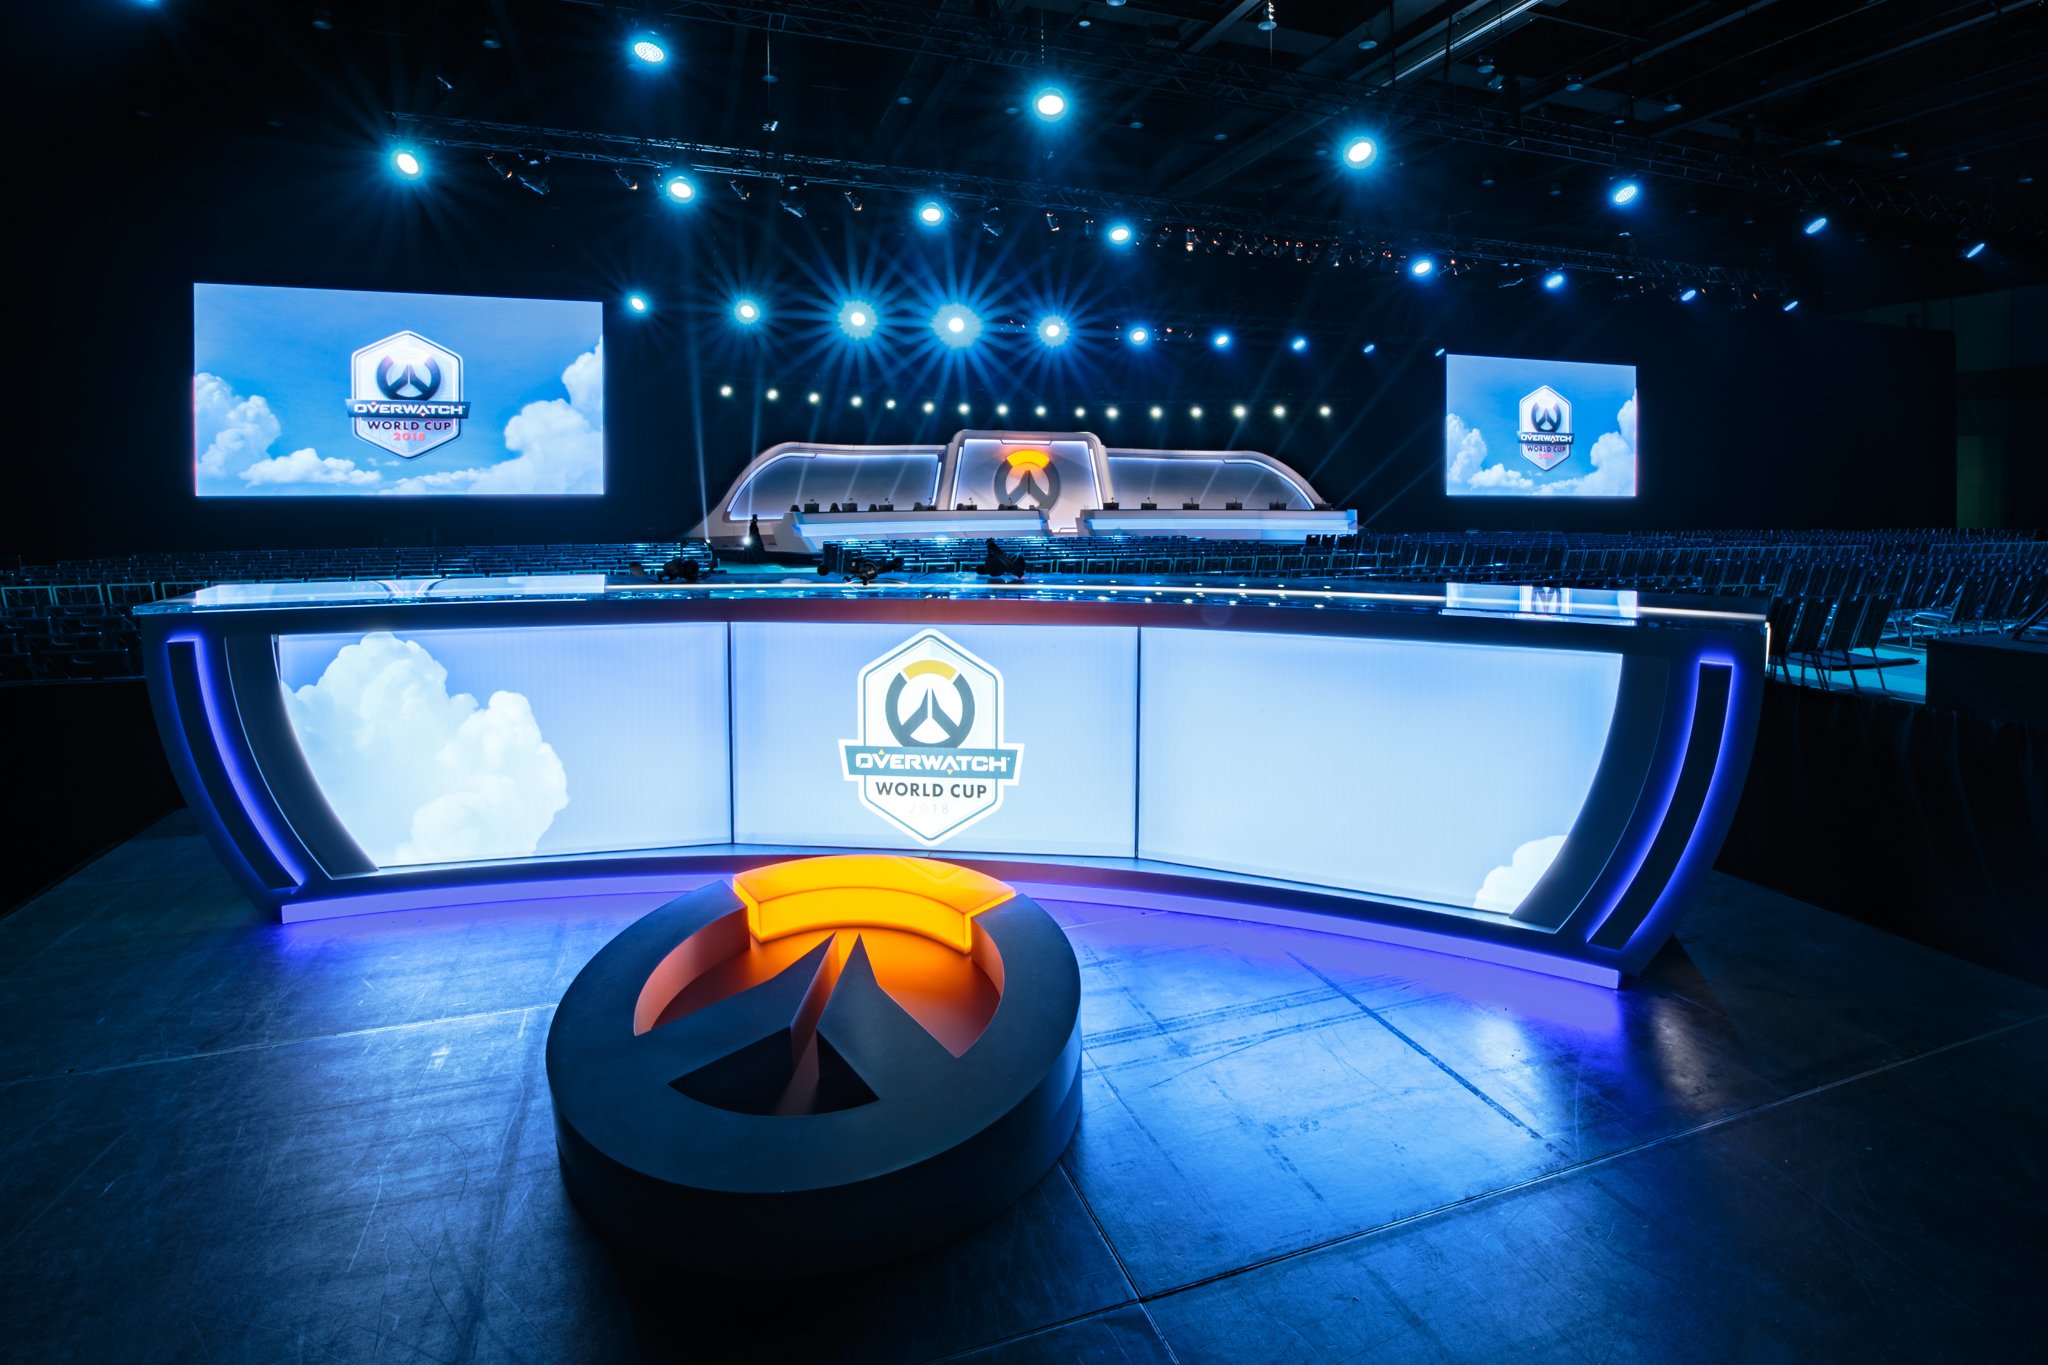 Blizzard introduces SEA Invitational tournament for Overwatch World Cup